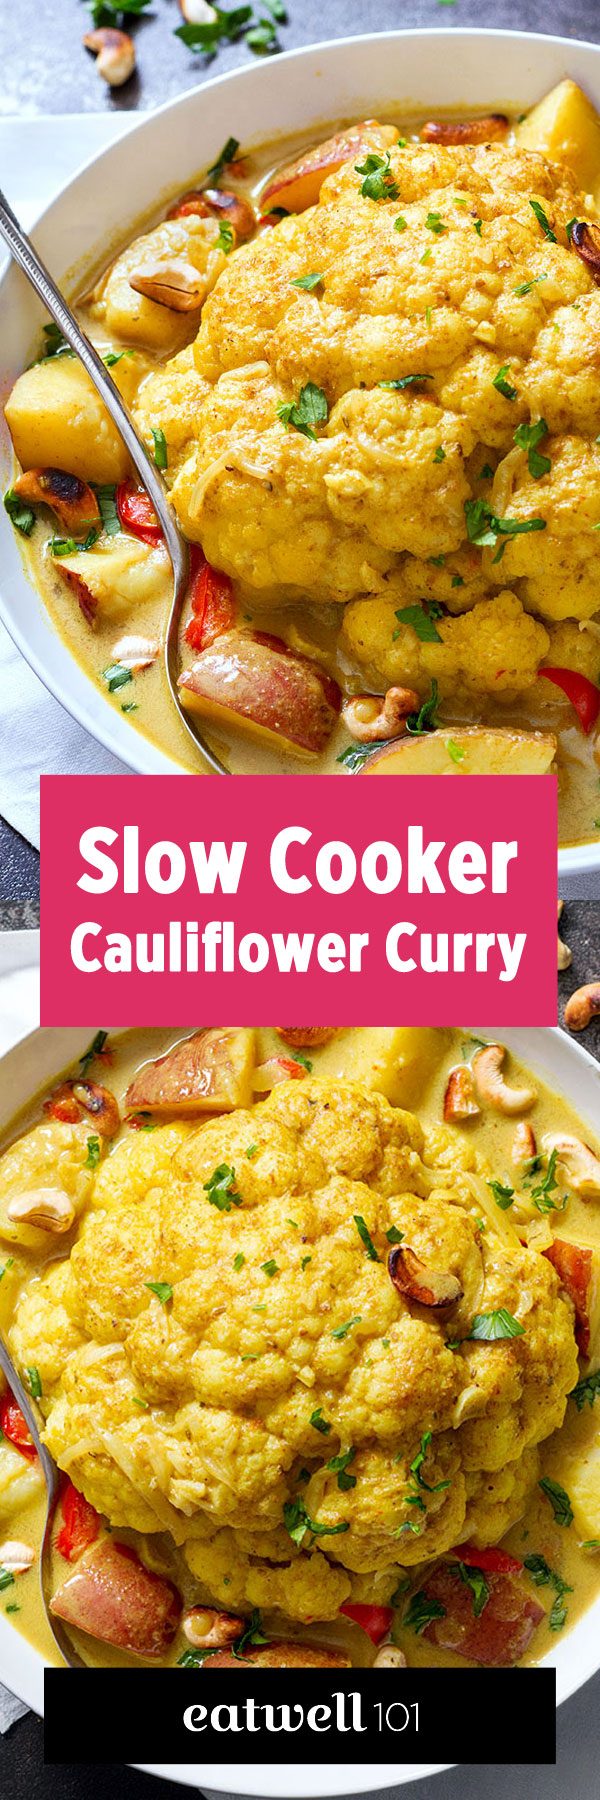 Slow Cooker Cauliflower Recipe - #cauliflower #recipe #slowcooker #eatwell101  - A soupy, slow-cooked whole cauliflower curry is taken up a notch with the addition of sweet red peppers and chopped potatoes. 